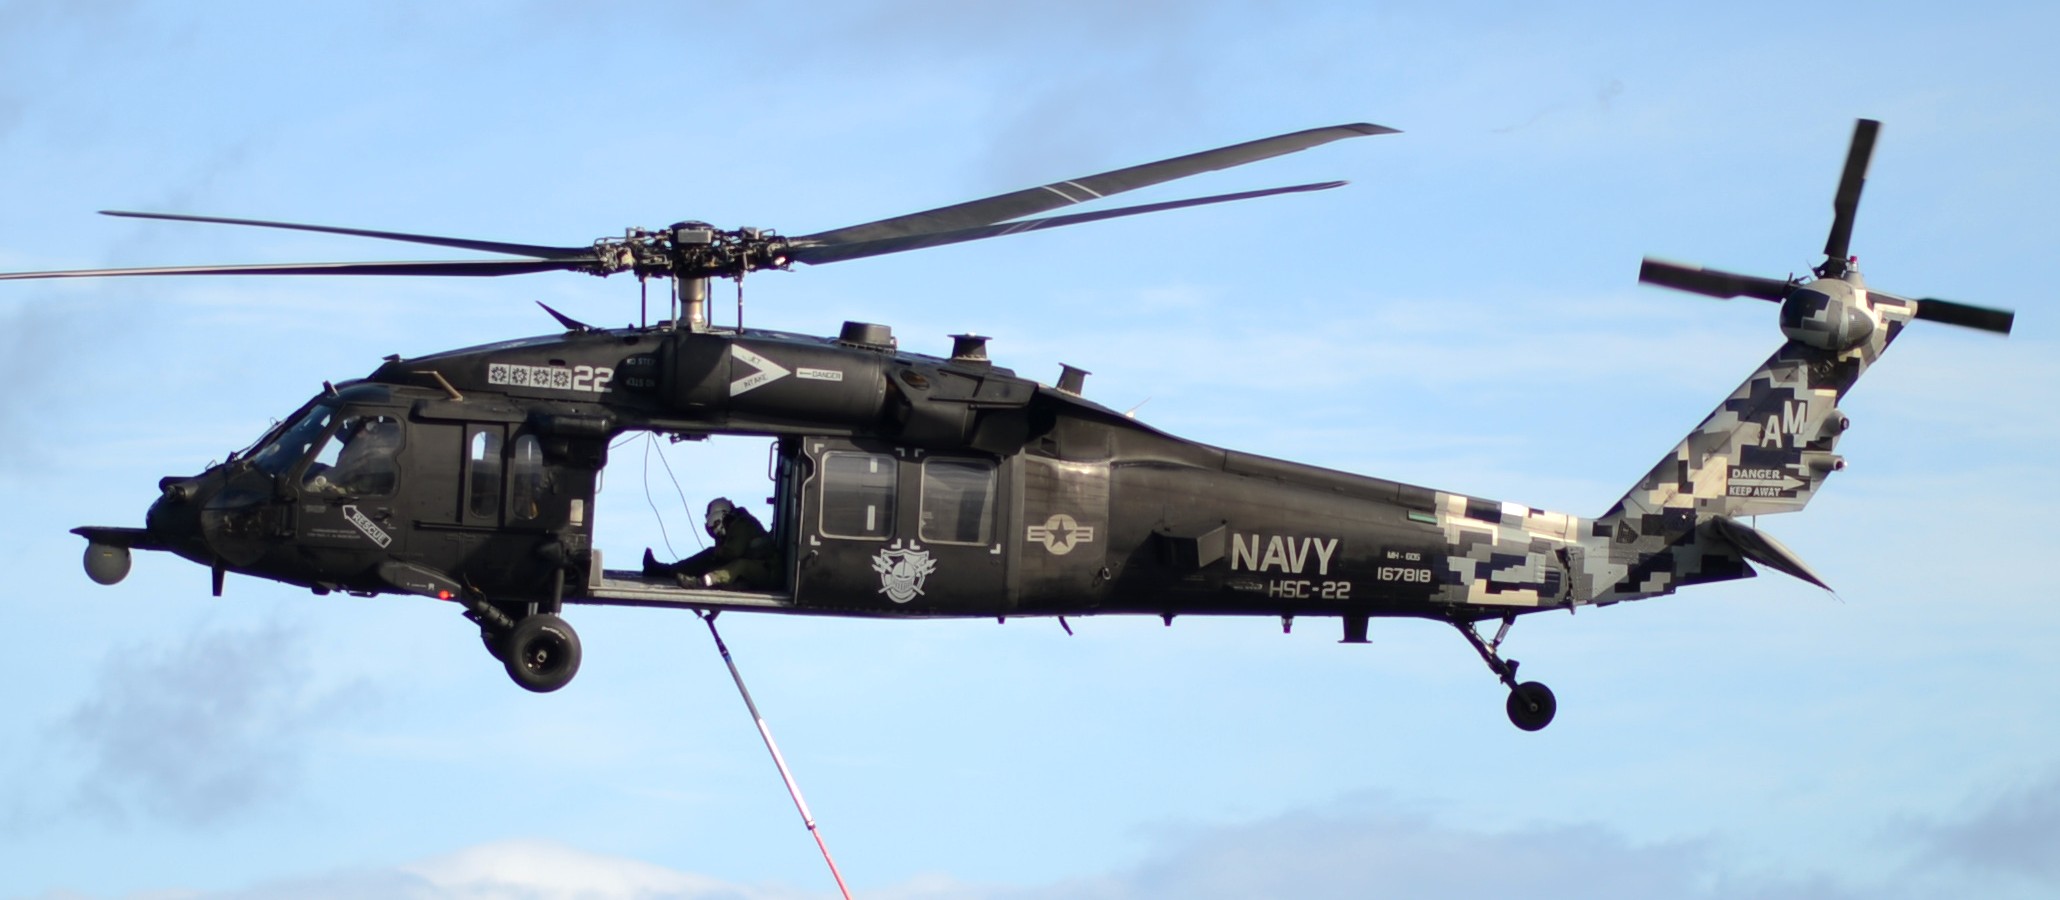 hsc-22 sea knights mh-60s seahawk special color black